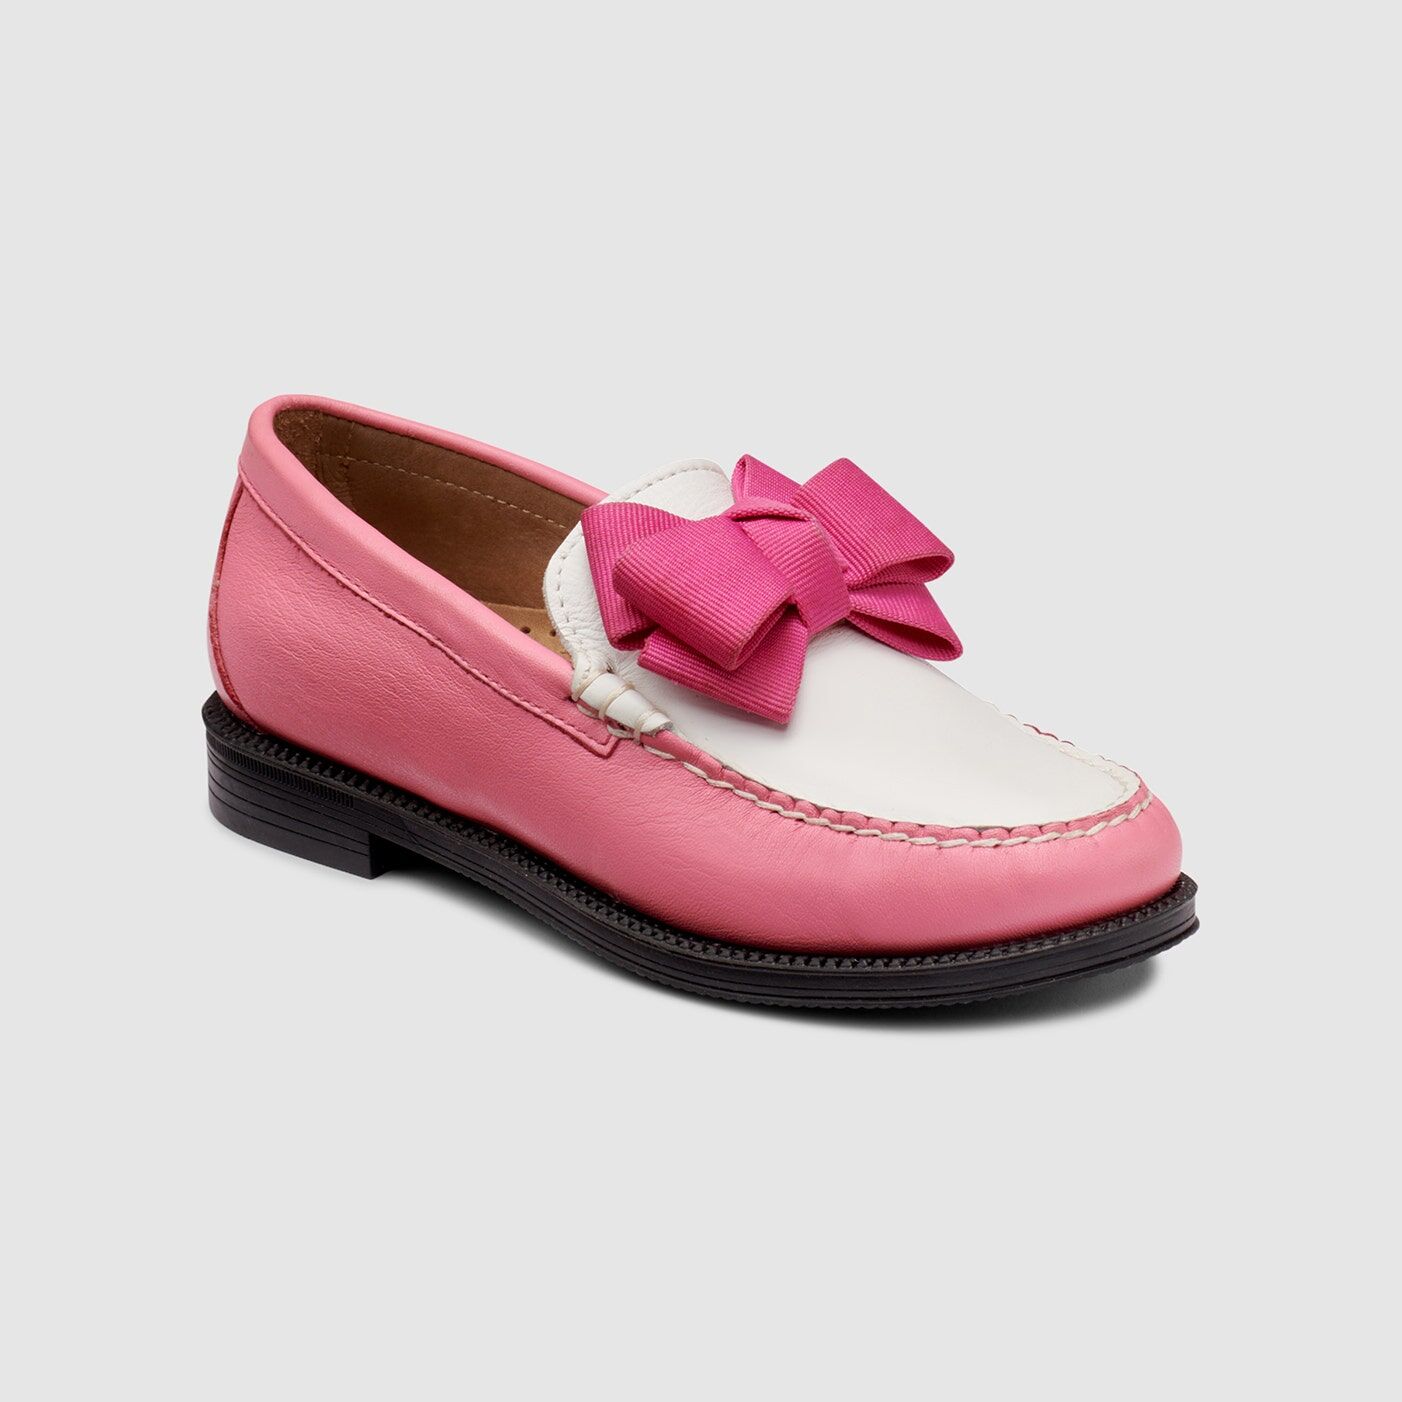 G.H.BASS Original G.H.BASS   Kids Ribbon Easy Weejuns Loafer Shoes   Pink   Size 4  - Size: 4